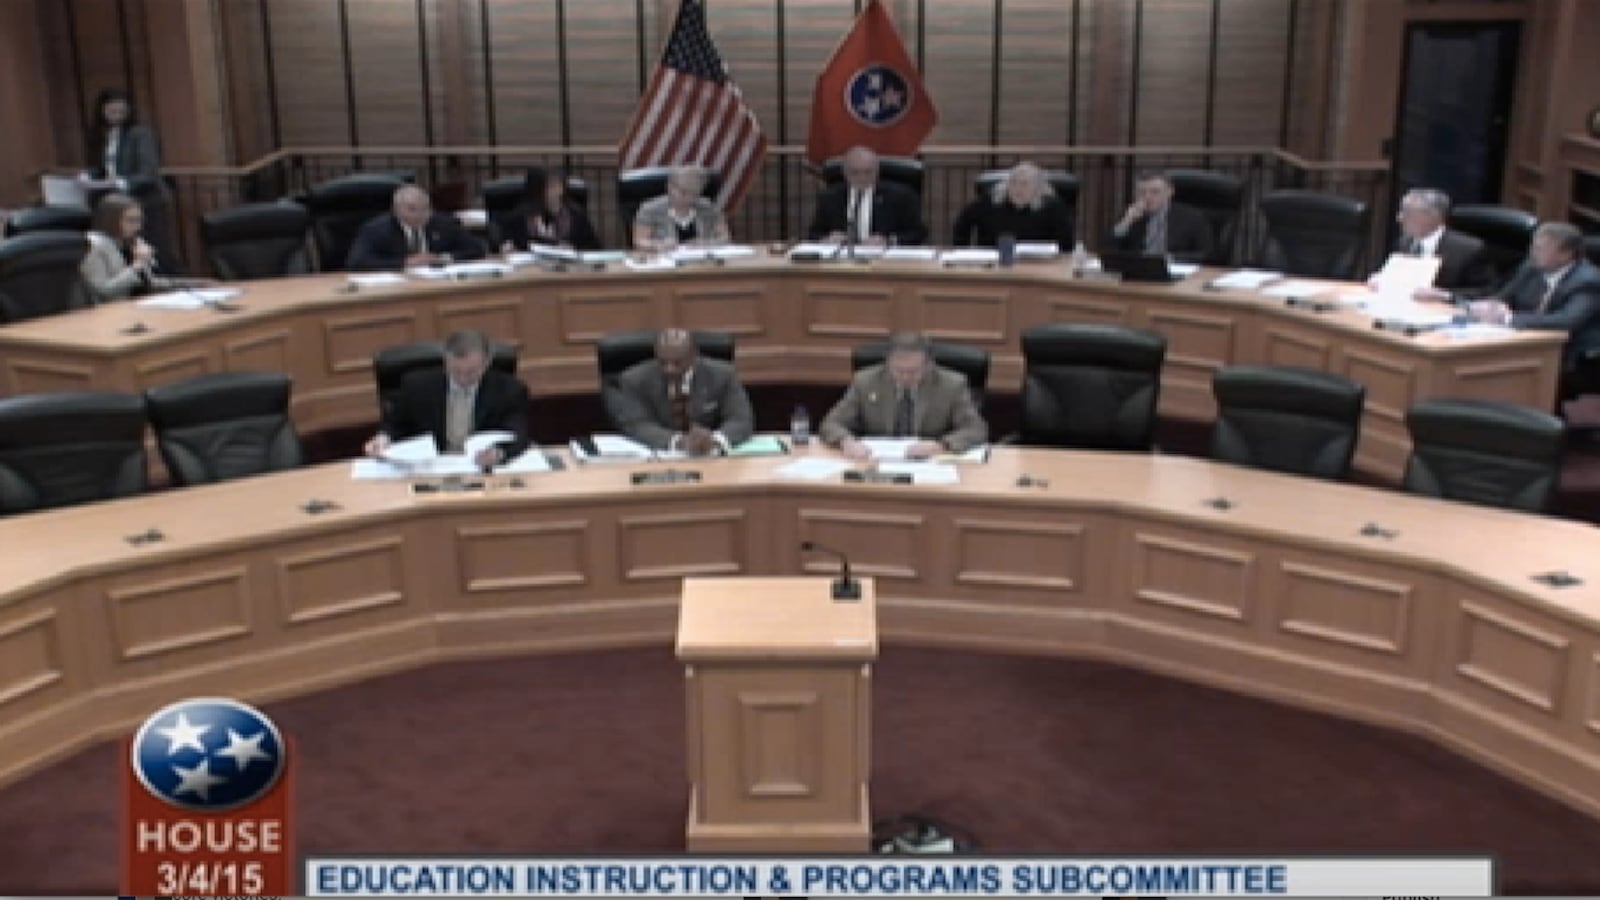 Tennessee lawmakers convene in committee on Wednesday to discuss education bills, including the Common Core State Standards.